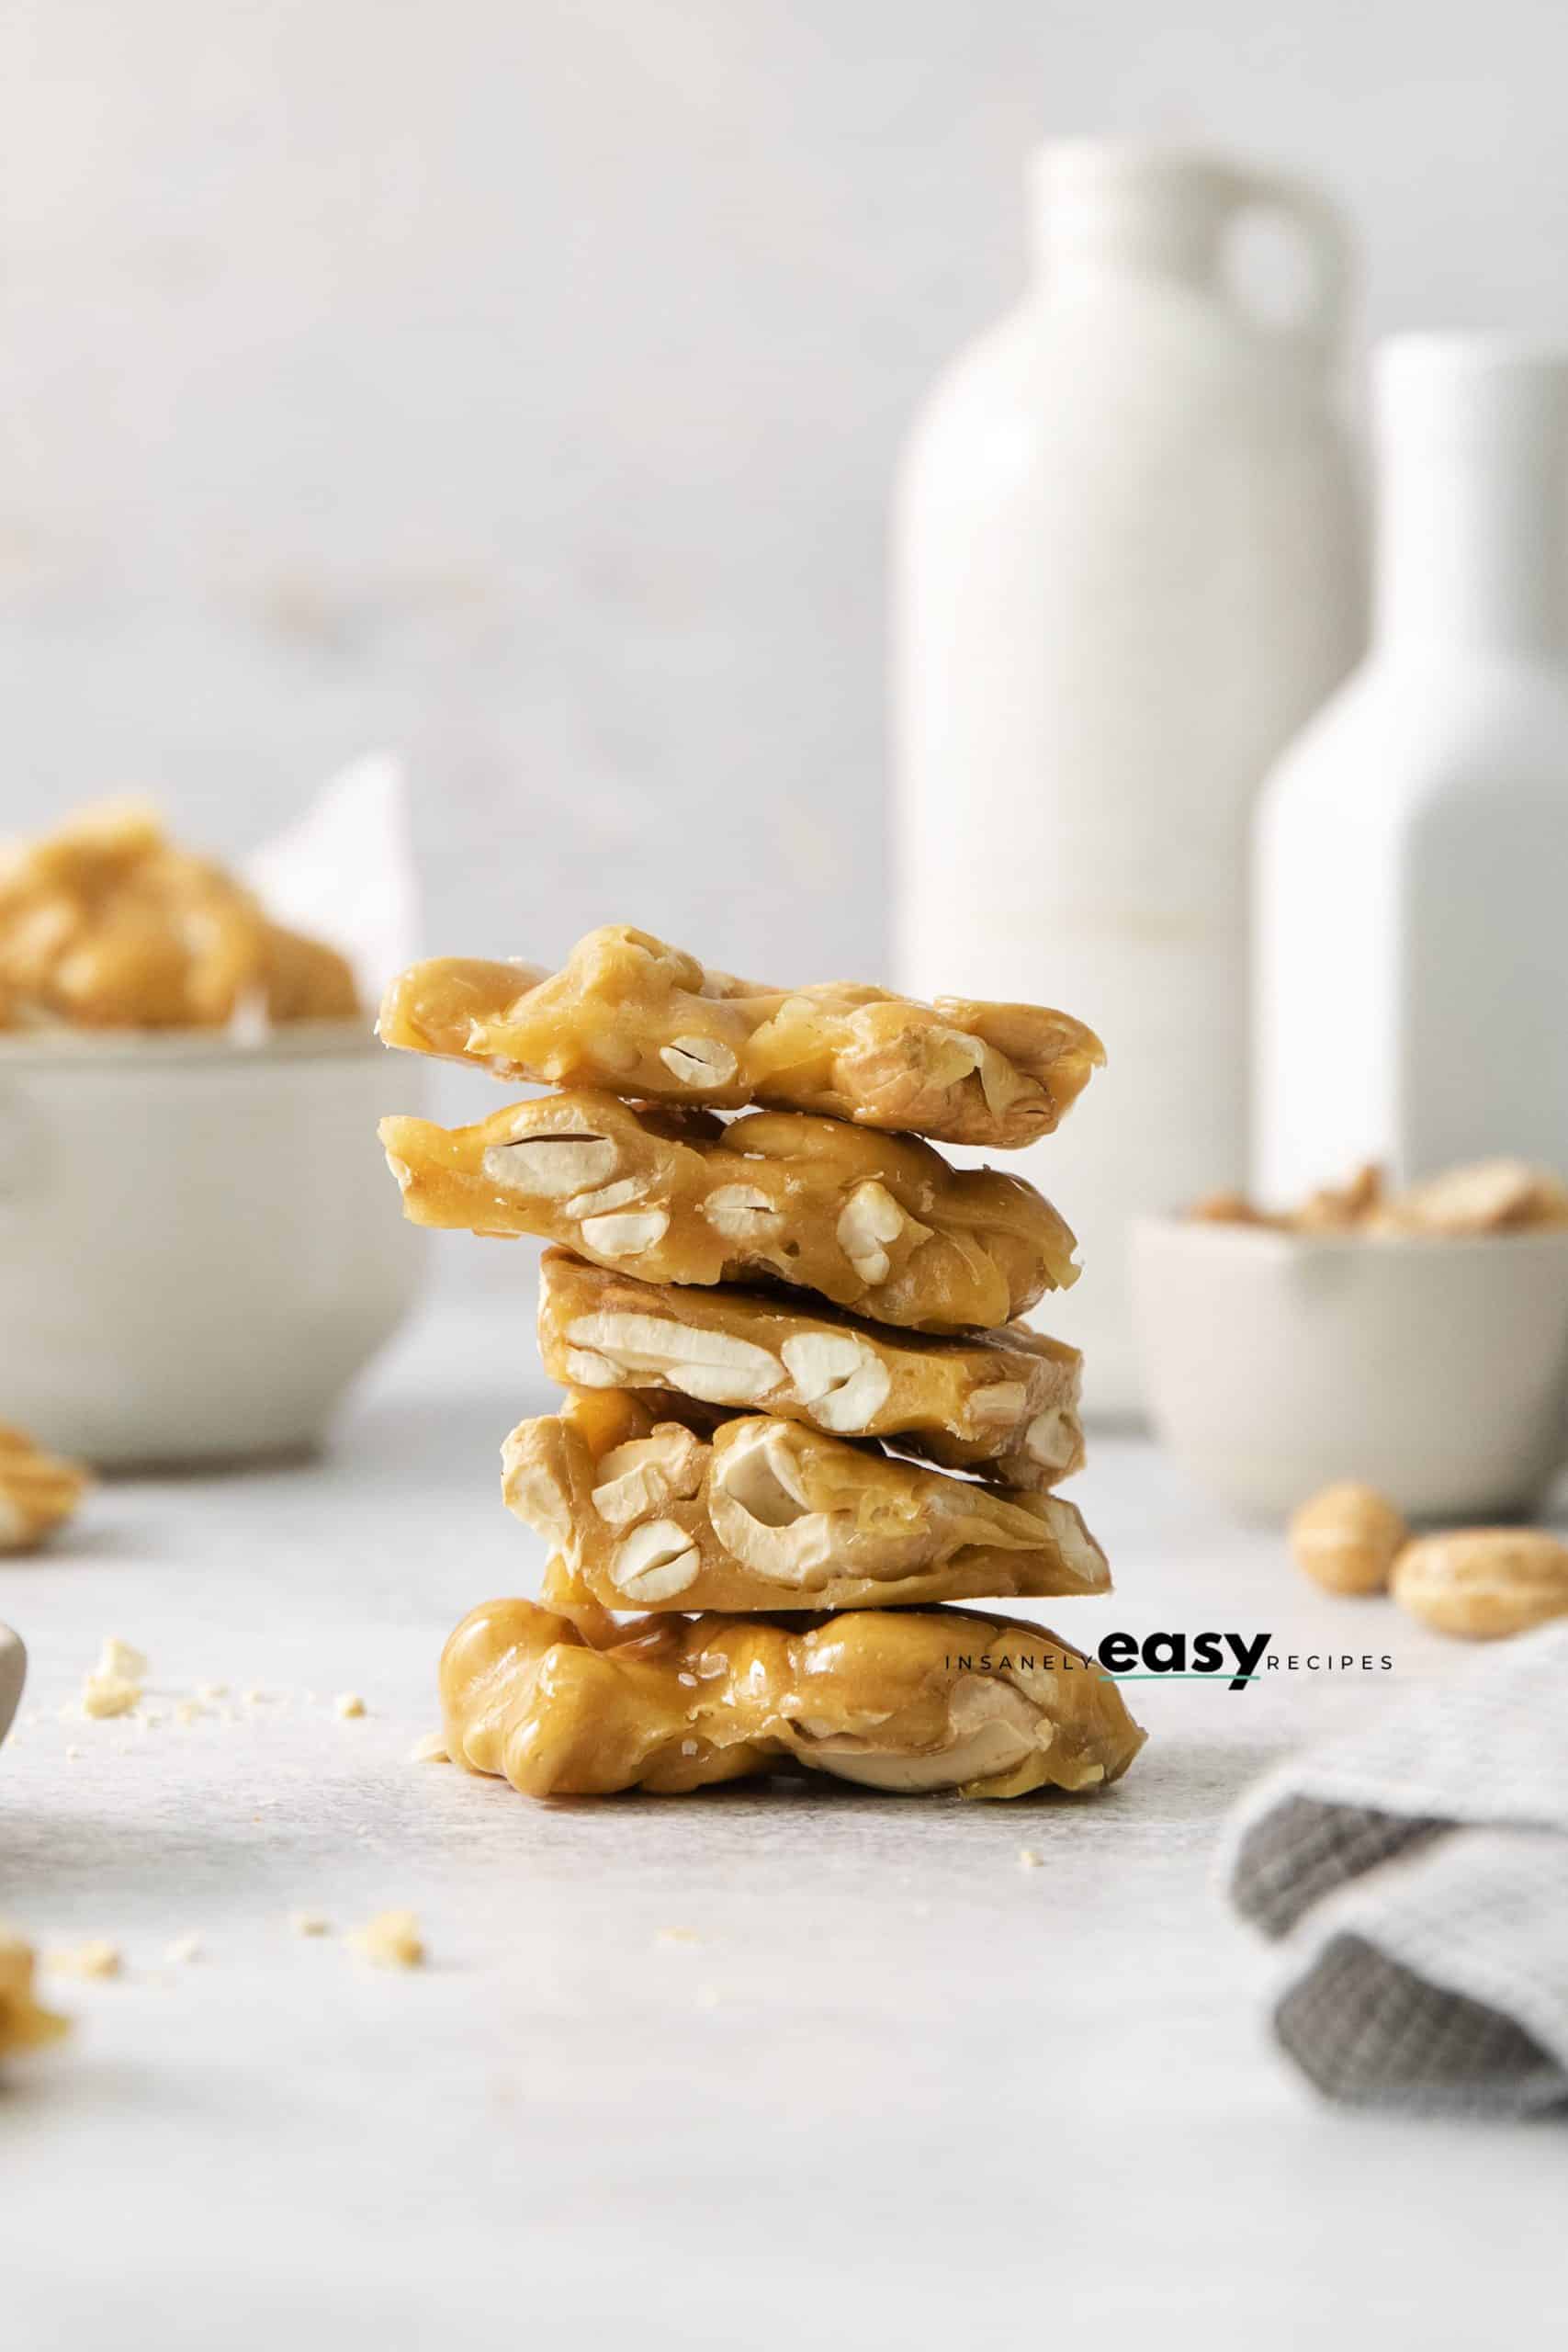 5 pieces of homemade cashew brittle, stacked on top of each other.